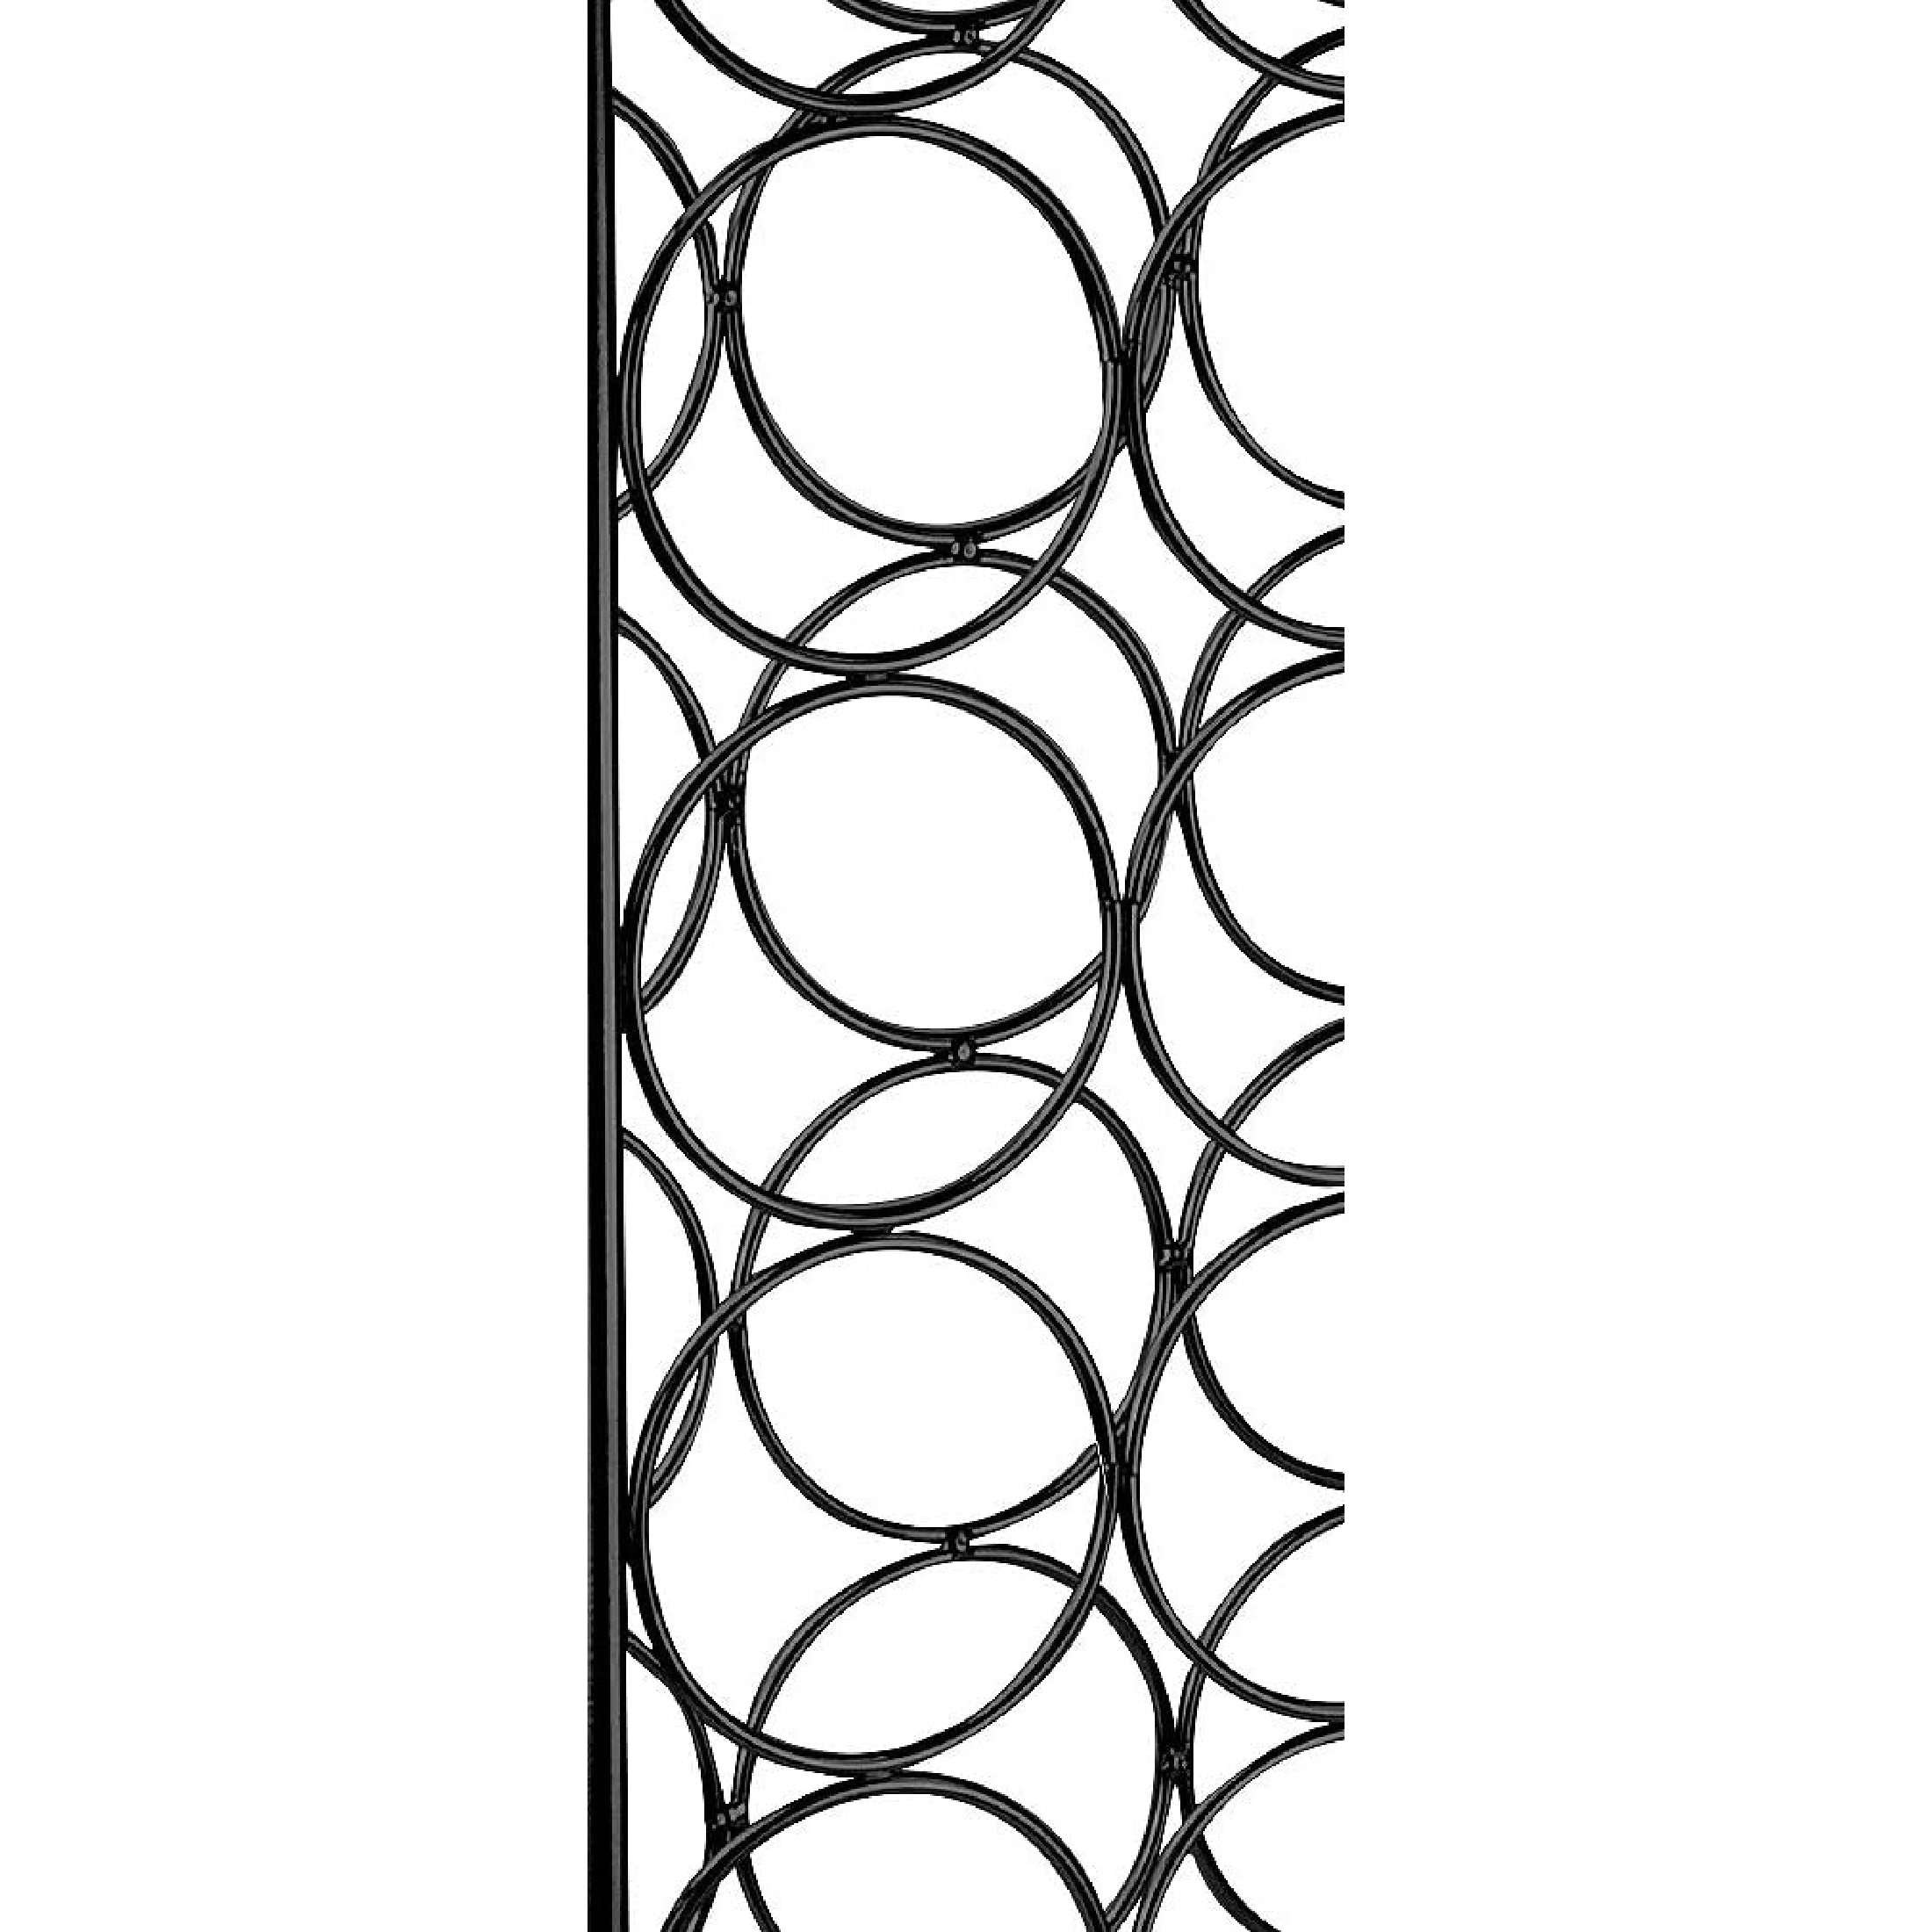 French Style Bordeaux Chateau Wine Rack (Holds 23 Bottles)